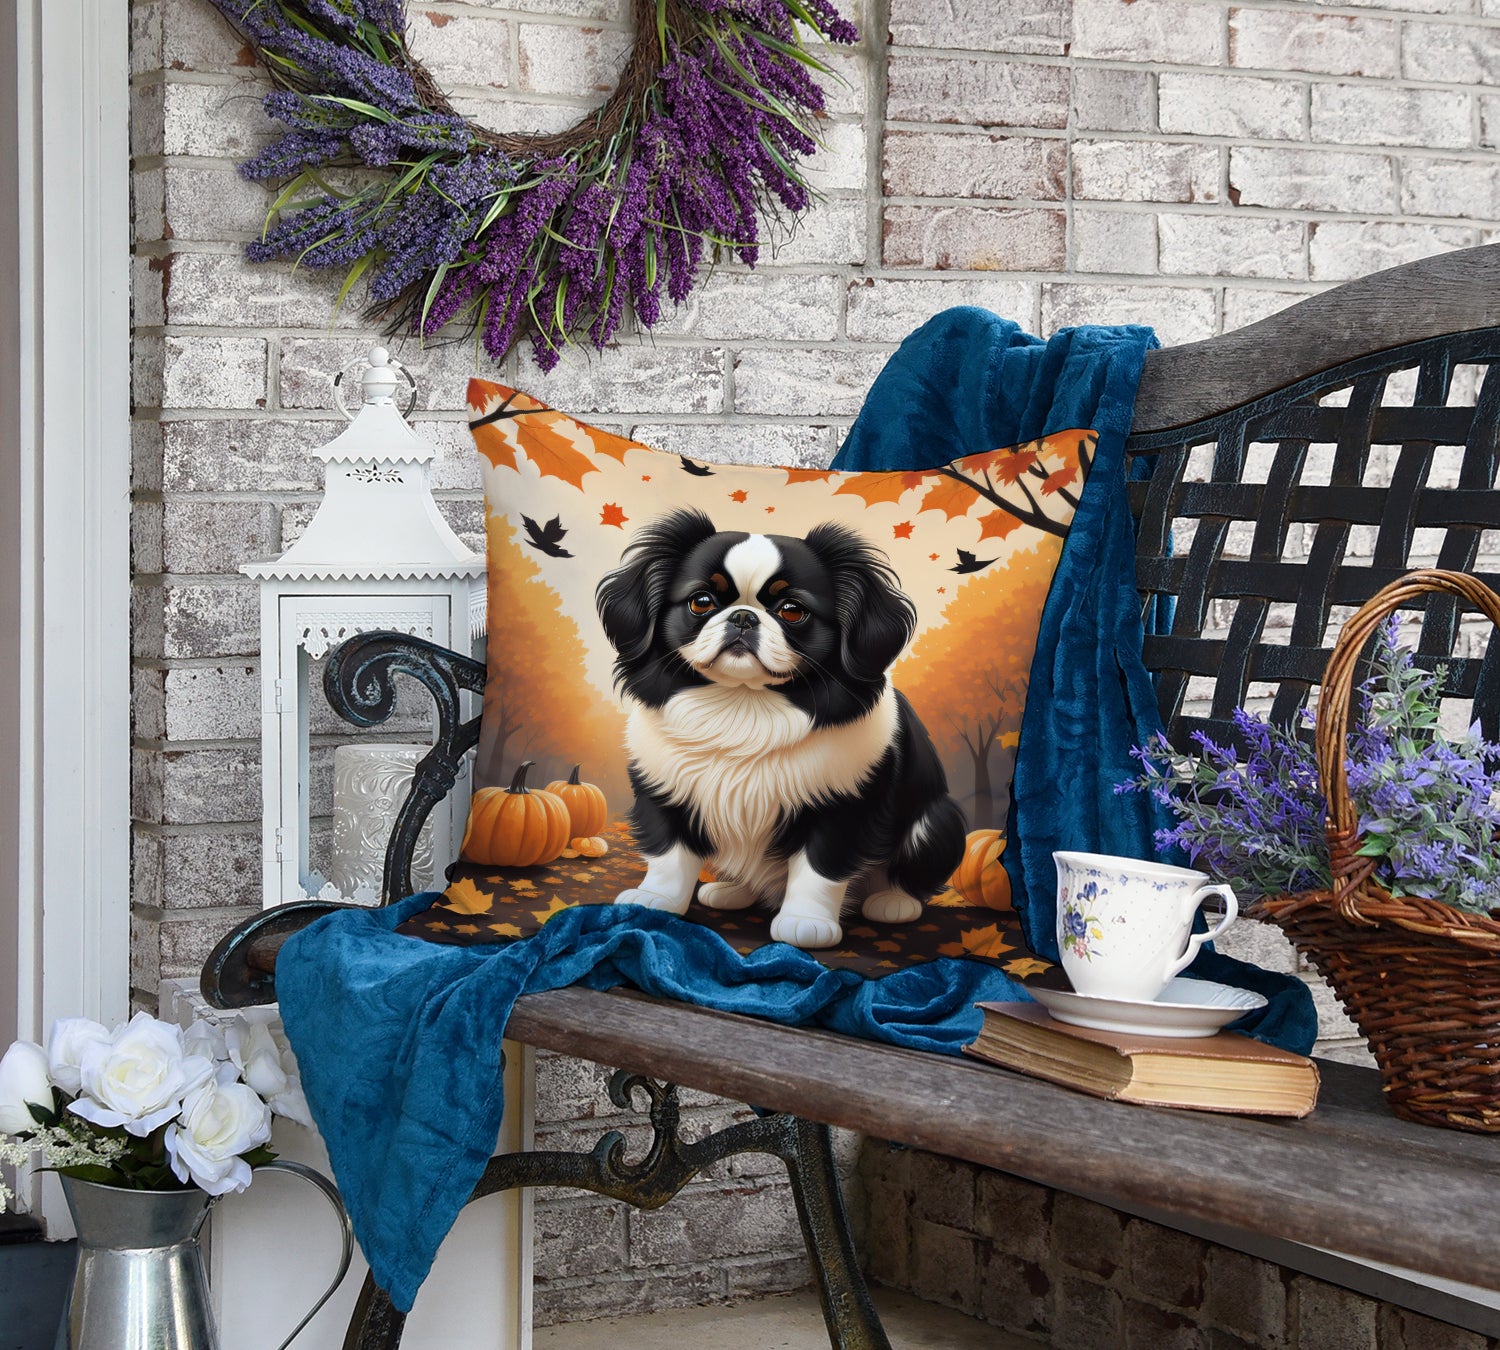 Buy this Japanese Chin Fall Fabric Decorative Pillow